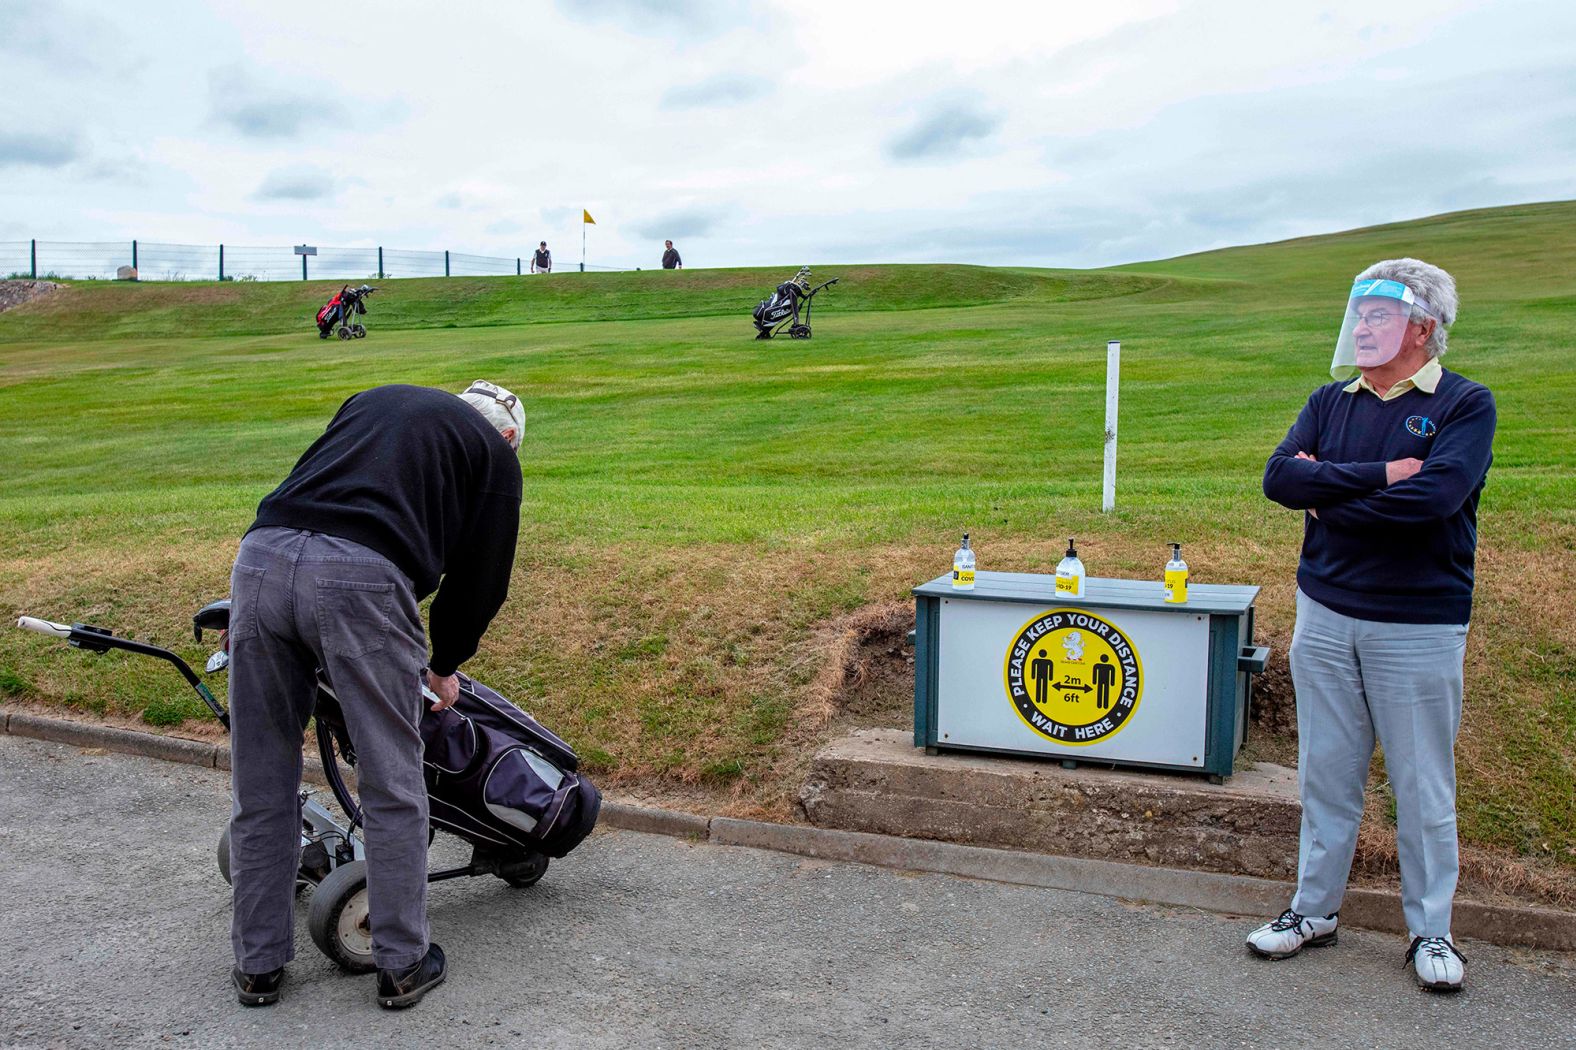 Golfers prepare to play a round at the Howth Golf Club in Dublin, Ireland, on May 18.